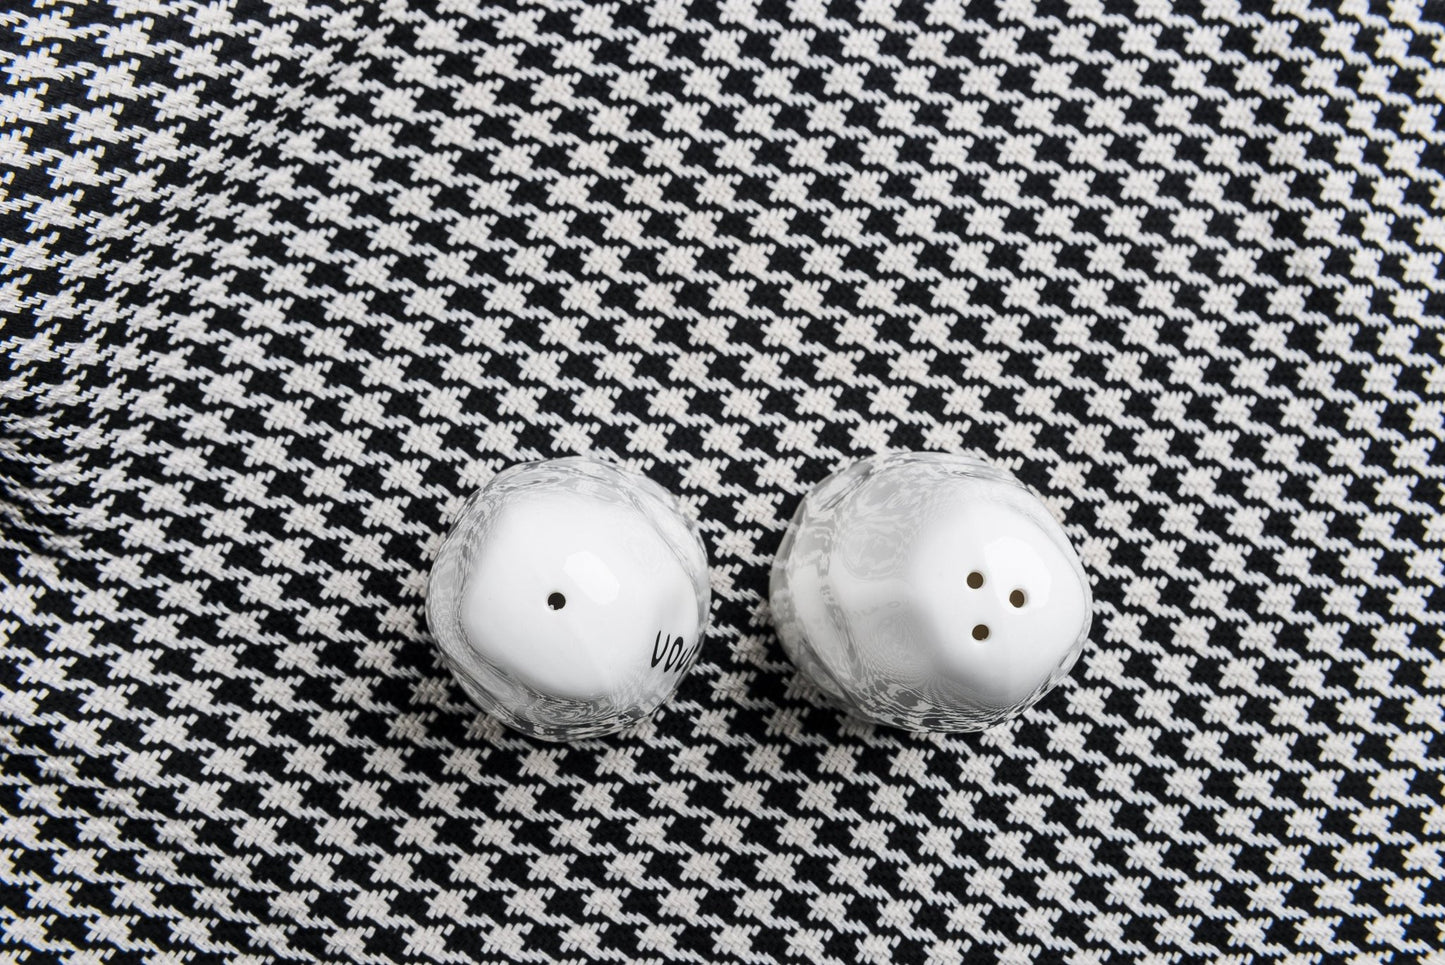 Cocaine & Heroin Salt and Pepper Shakers x David Shrigley - HOUSE OF SHE